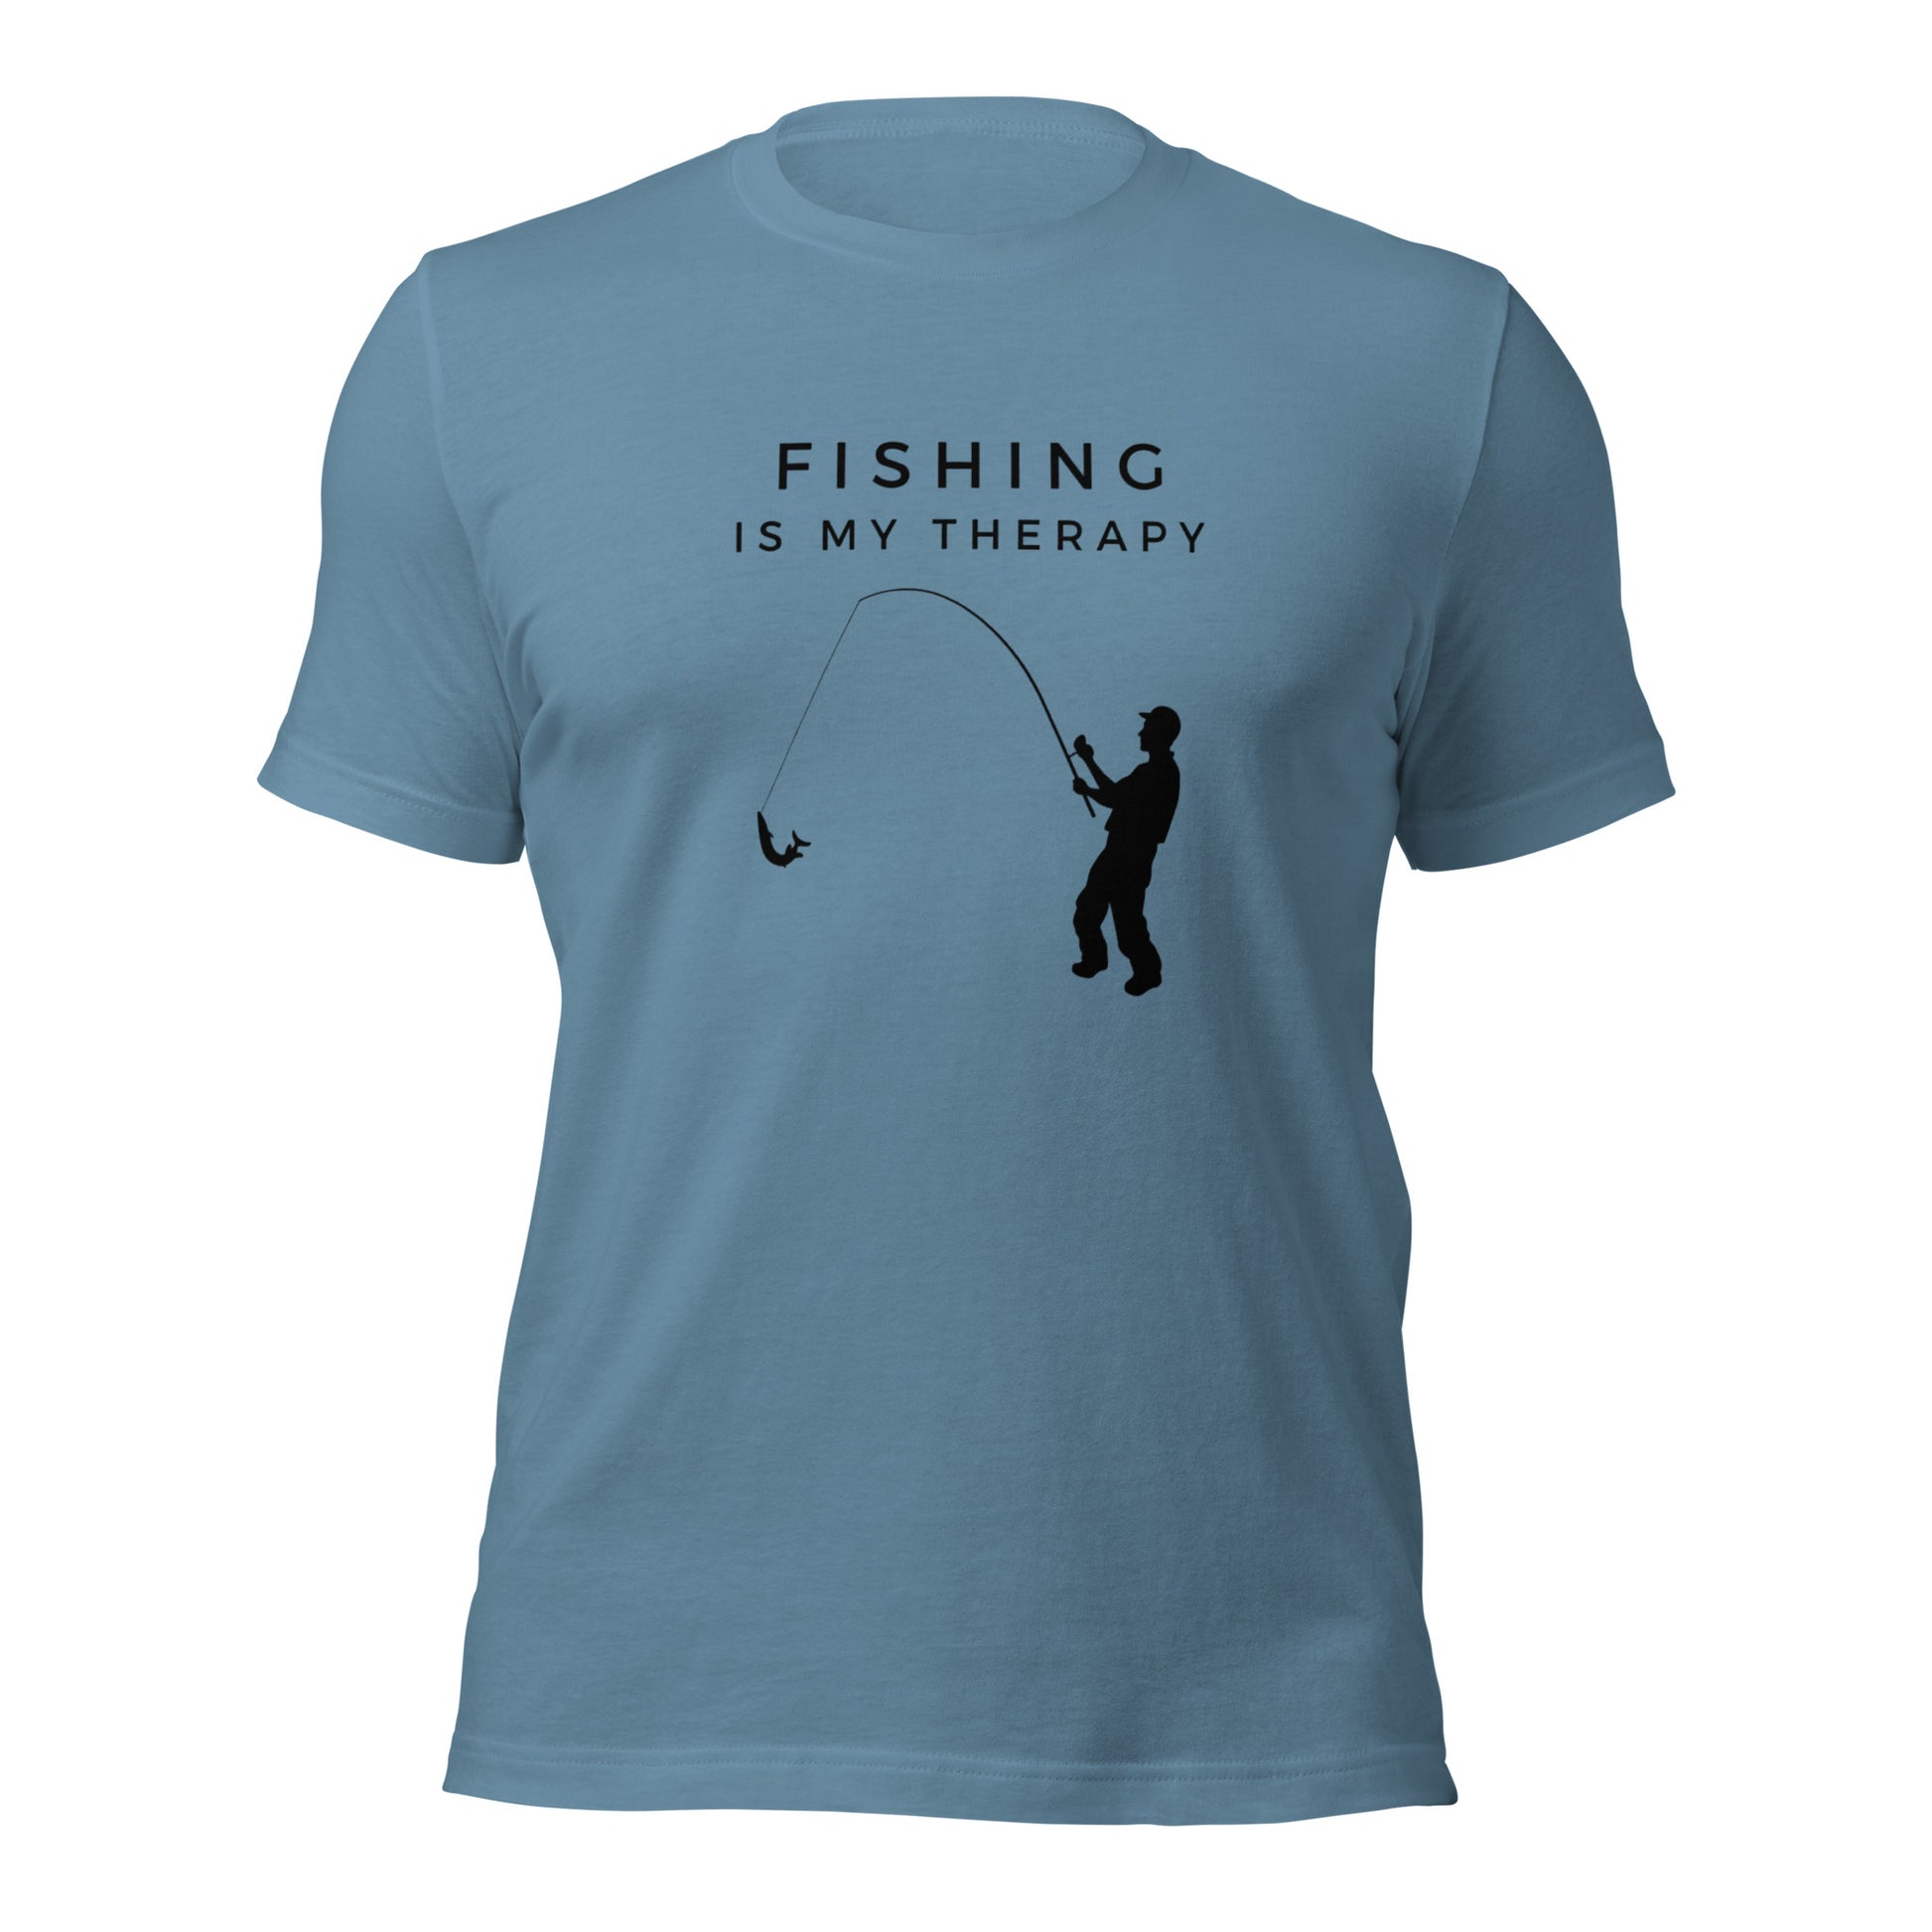 "Fishing Is My Therapy" T-Shirt - Weave Got Gifts - Unique Gifts You Won’t Find Anywhere Else!